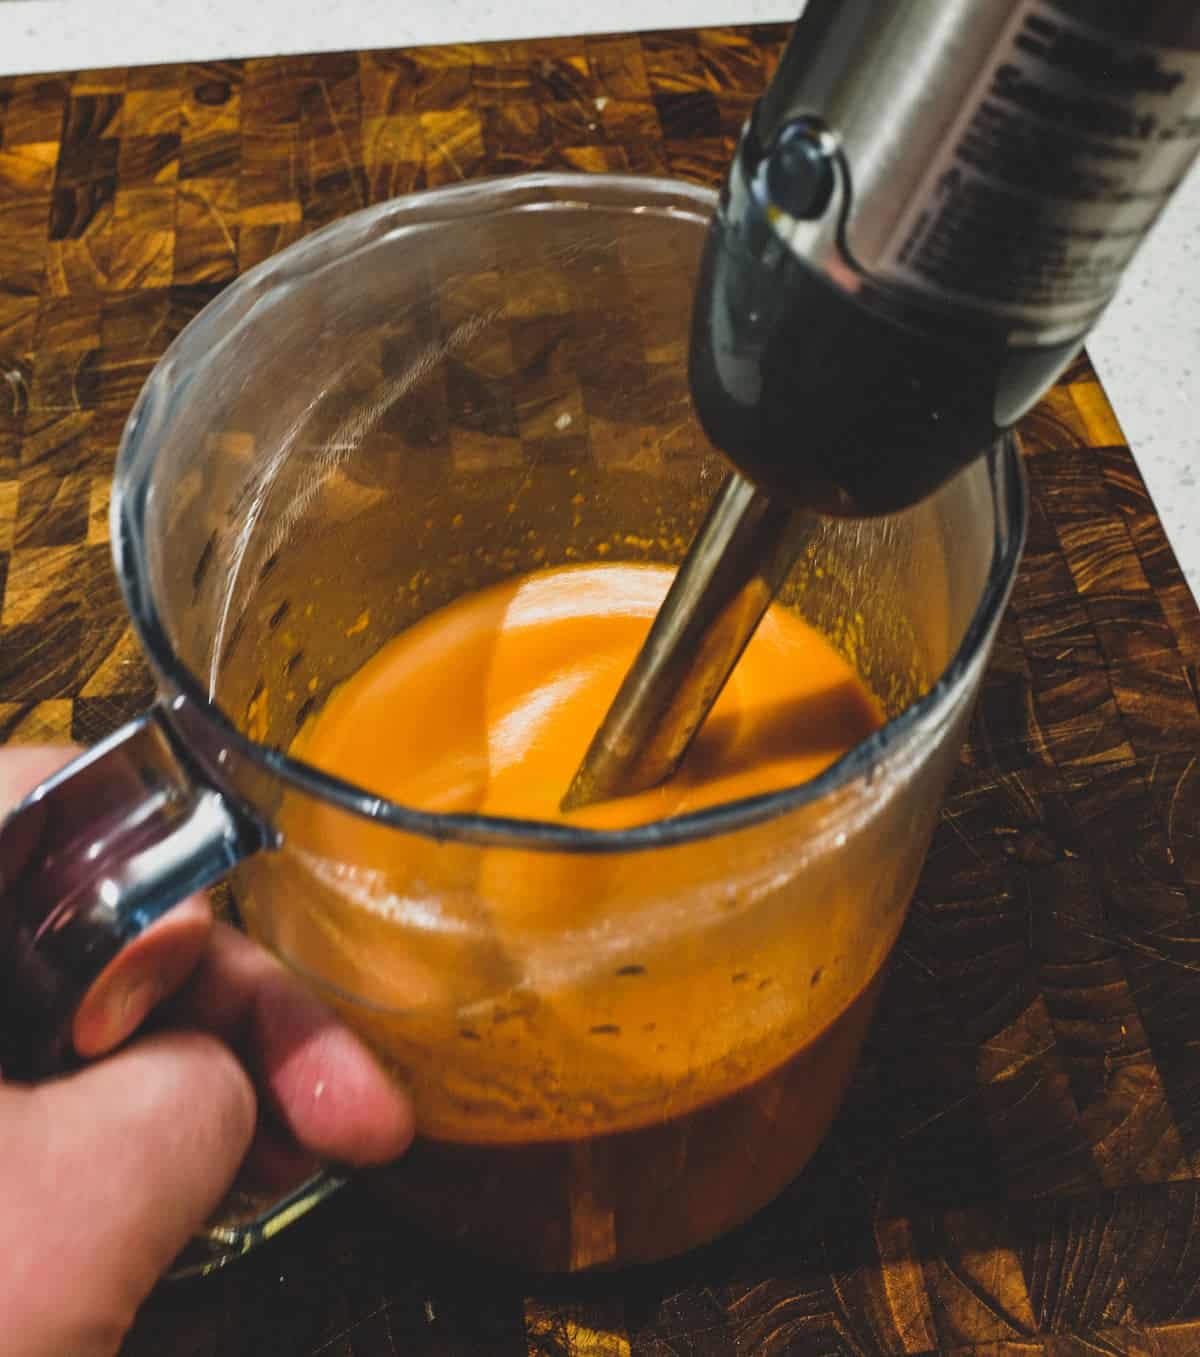 Blending together onion, garlic, sherry and smoked paprika using an immersion blender.